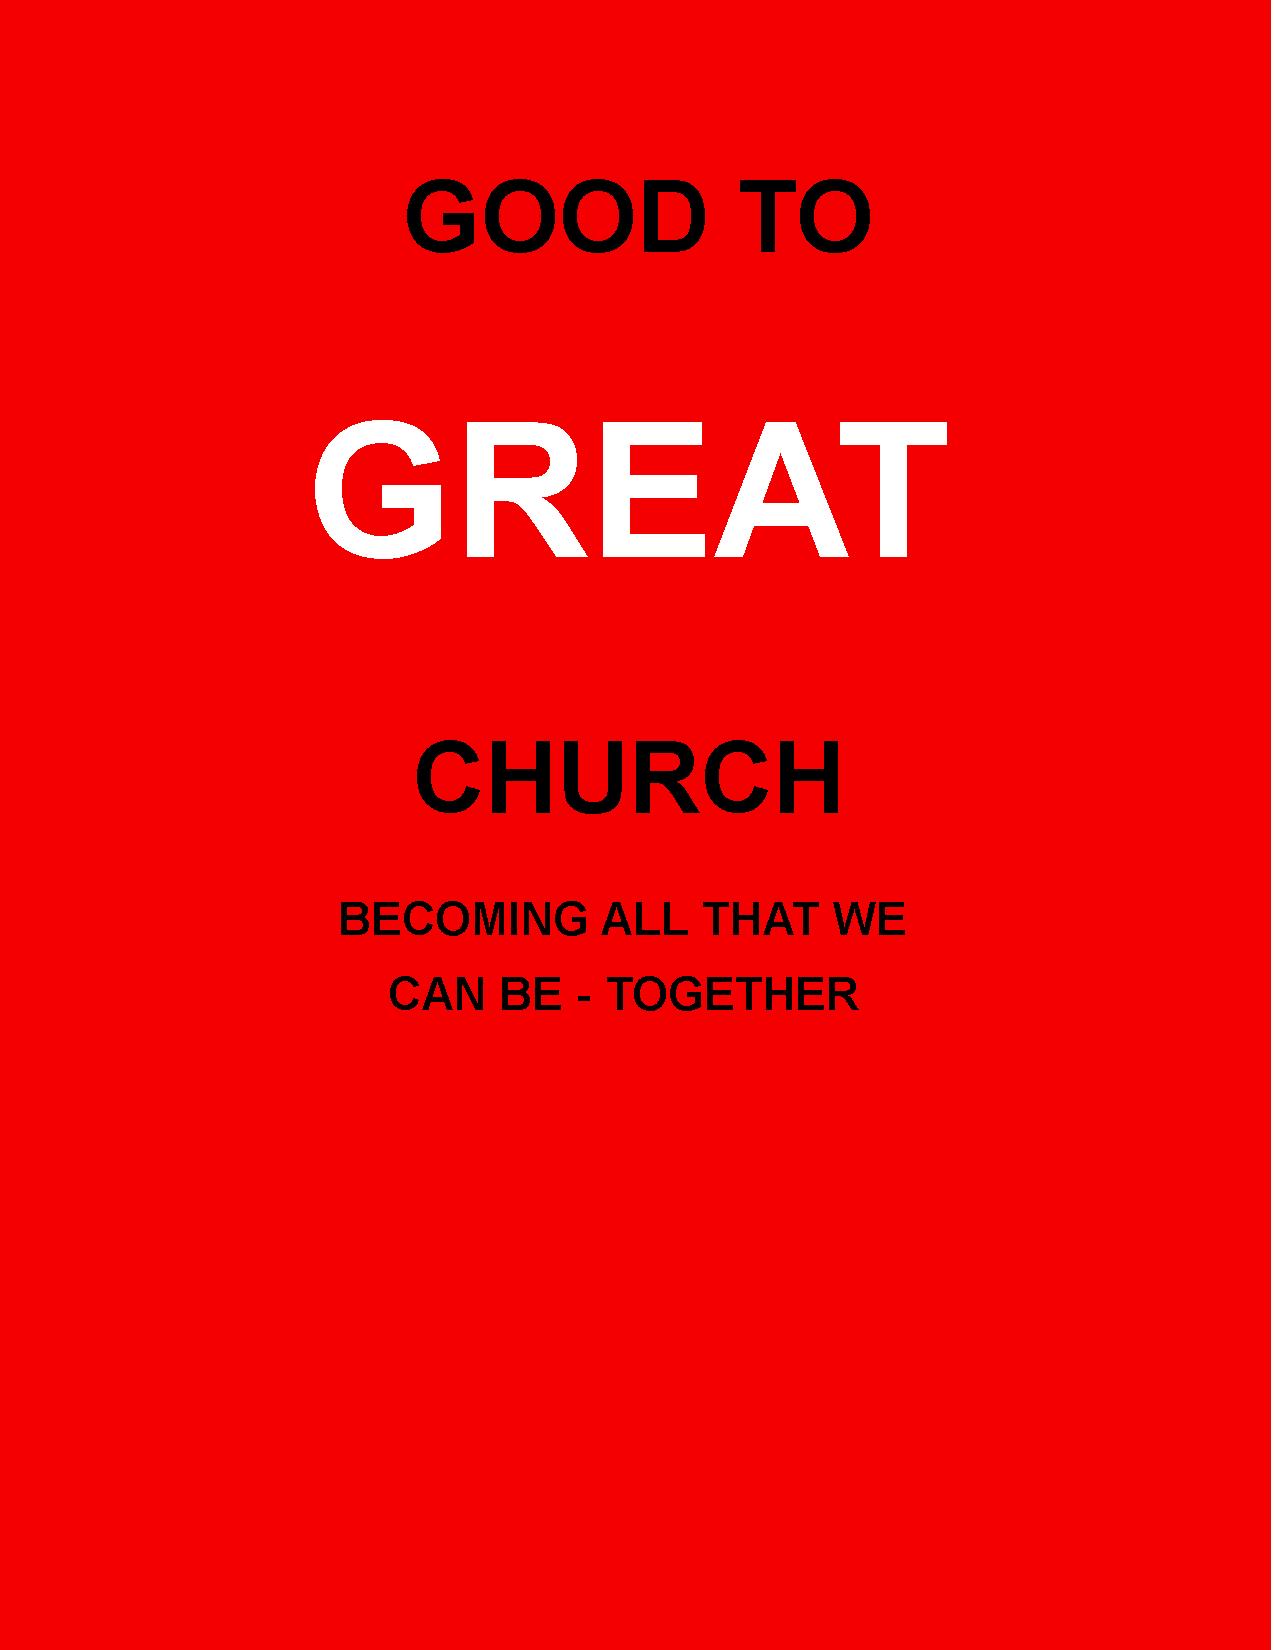 Becoming a Church of Great Moral Character